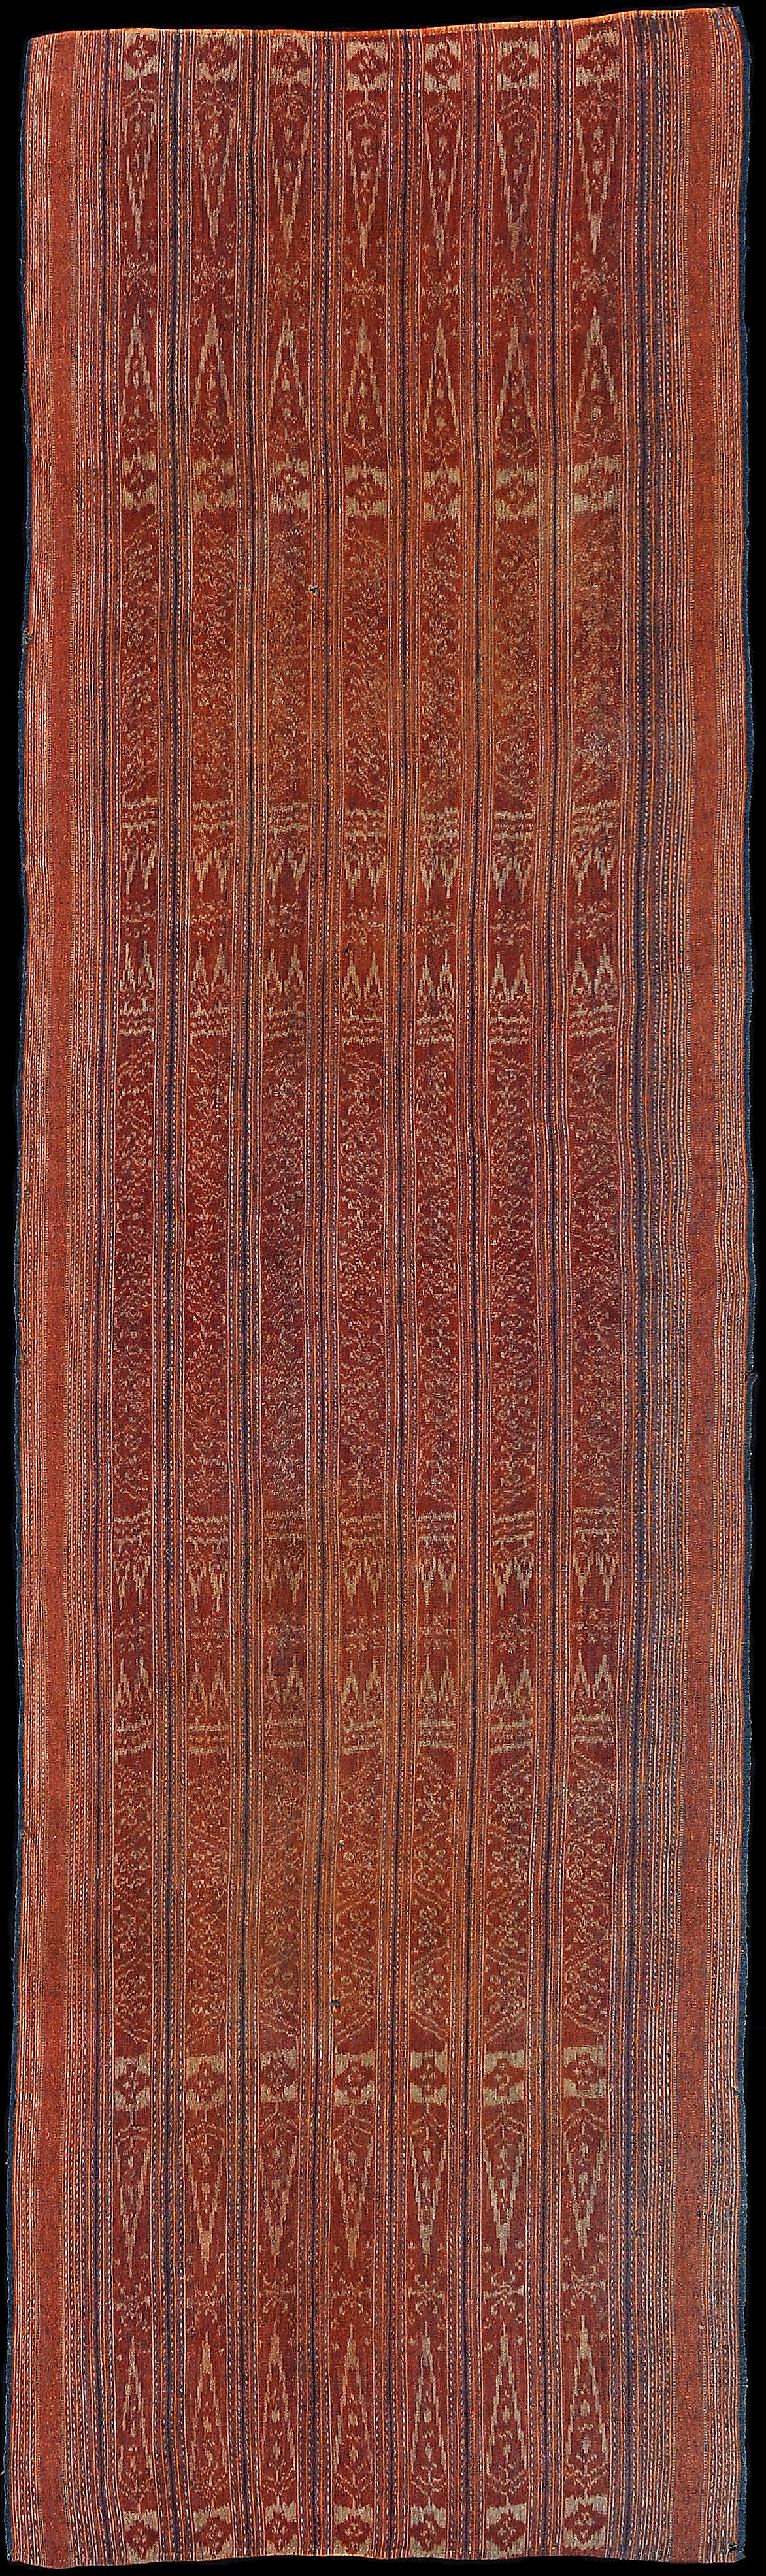 Ikat from Kisar, Moluccas, Indonesia